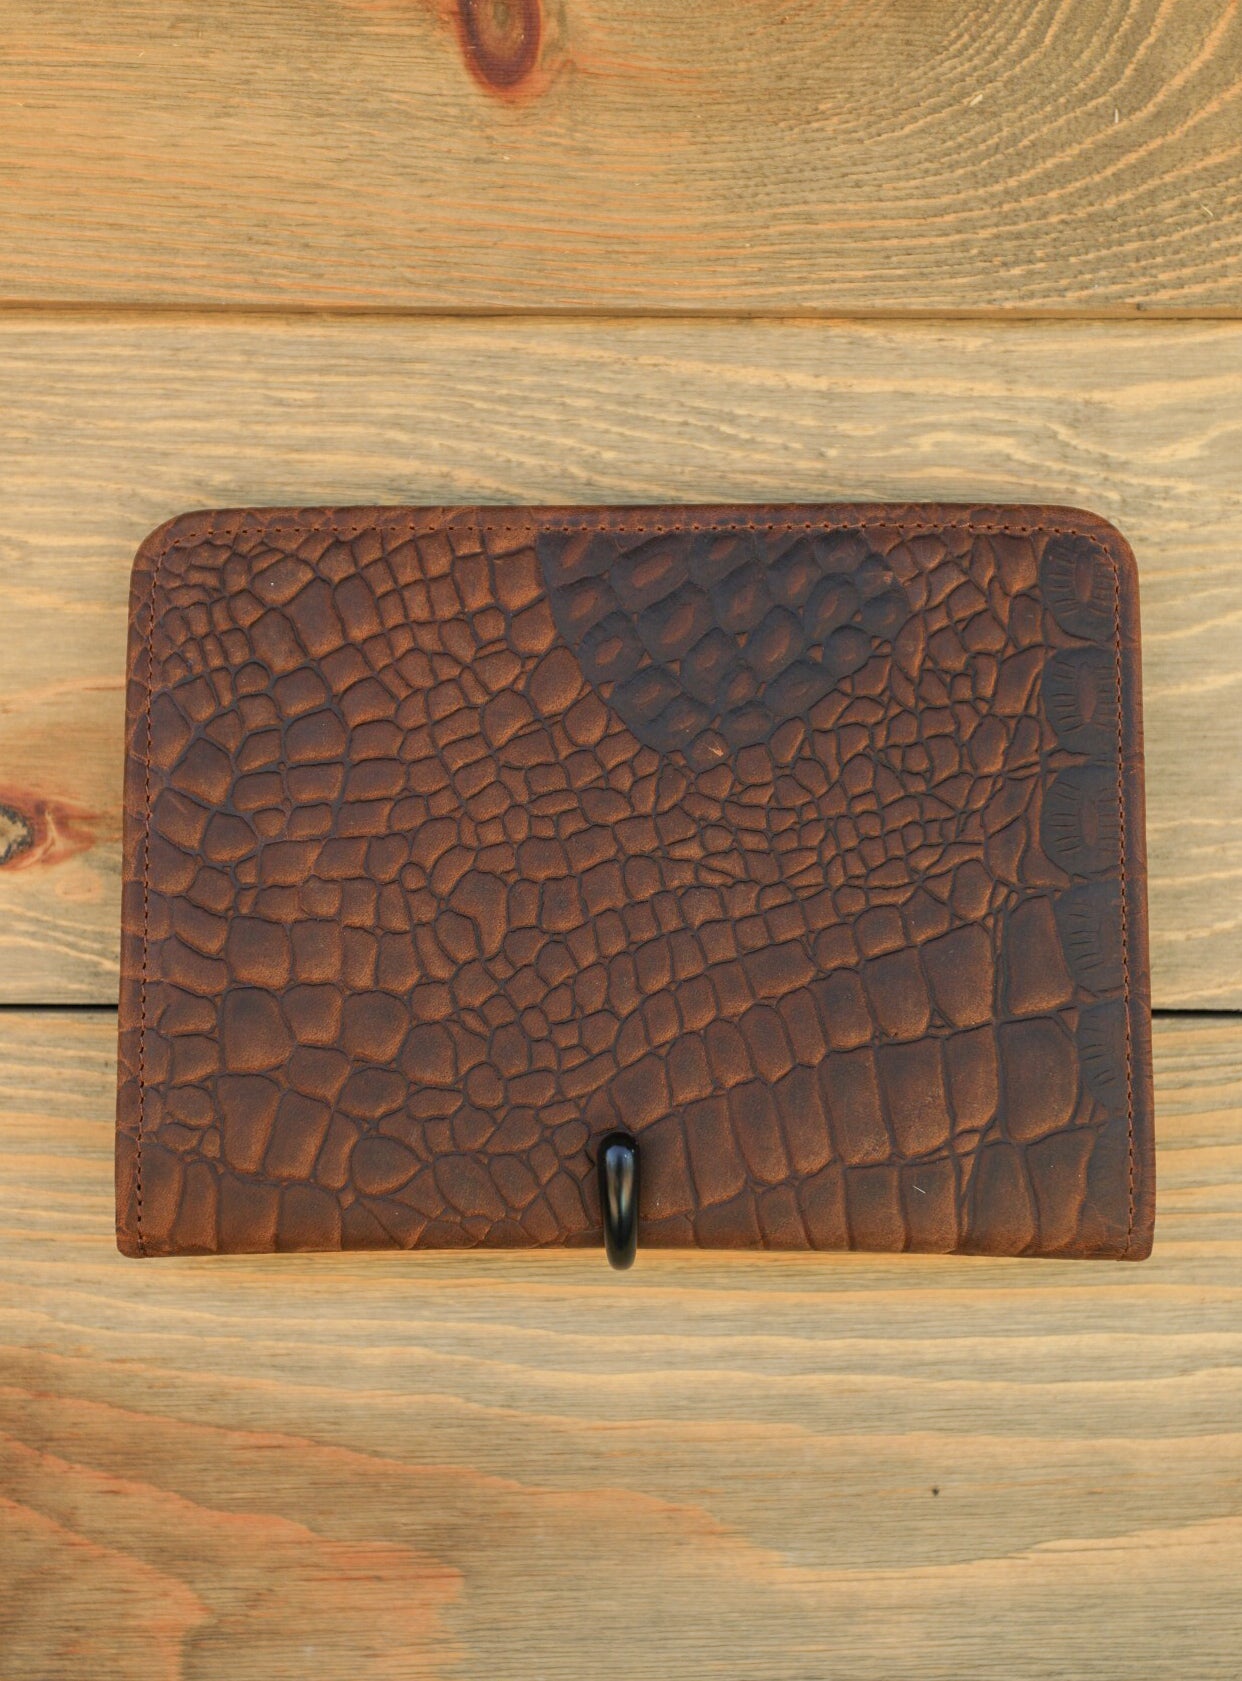 Catalina Croc Wallet-Purses/Bags-Crooked Horn Company, Online Women's Fashion Boutique in San Tan Valley, Arizona 85140